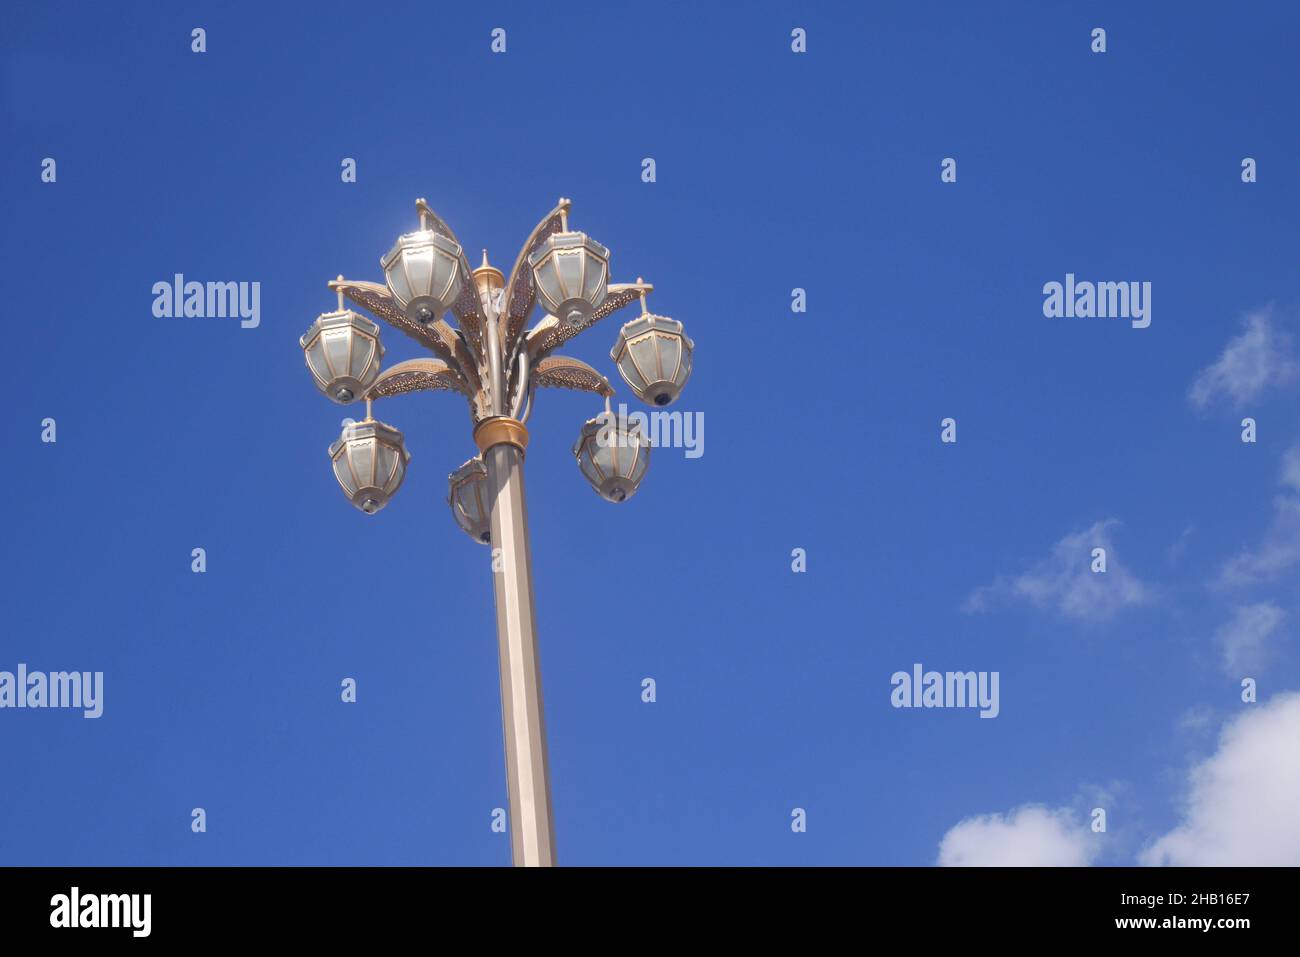 Lights outside the Qasr al Watan, Palace of the Nation, the presidential palace of the United Arab Emirates, Abu Dhabi, United Arab Emirates Stock Photo